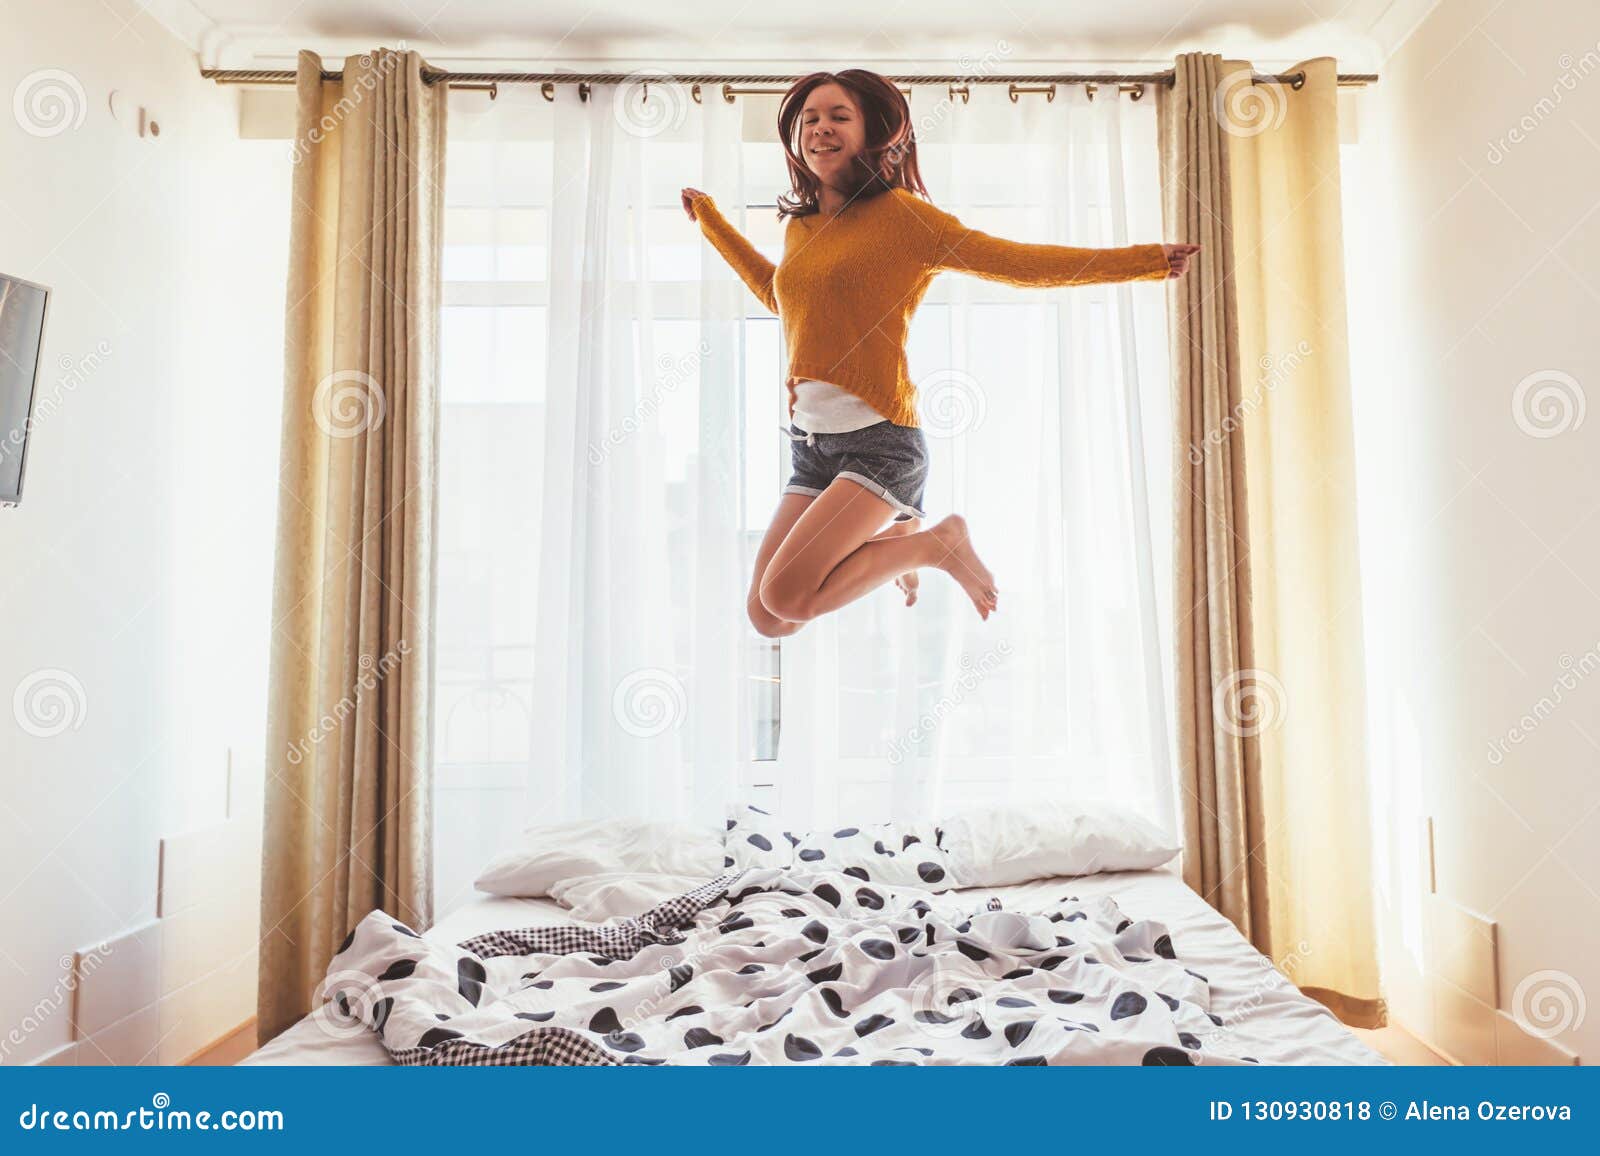 Weekend Morning In Hotel Stock Photo Image Of Curtains